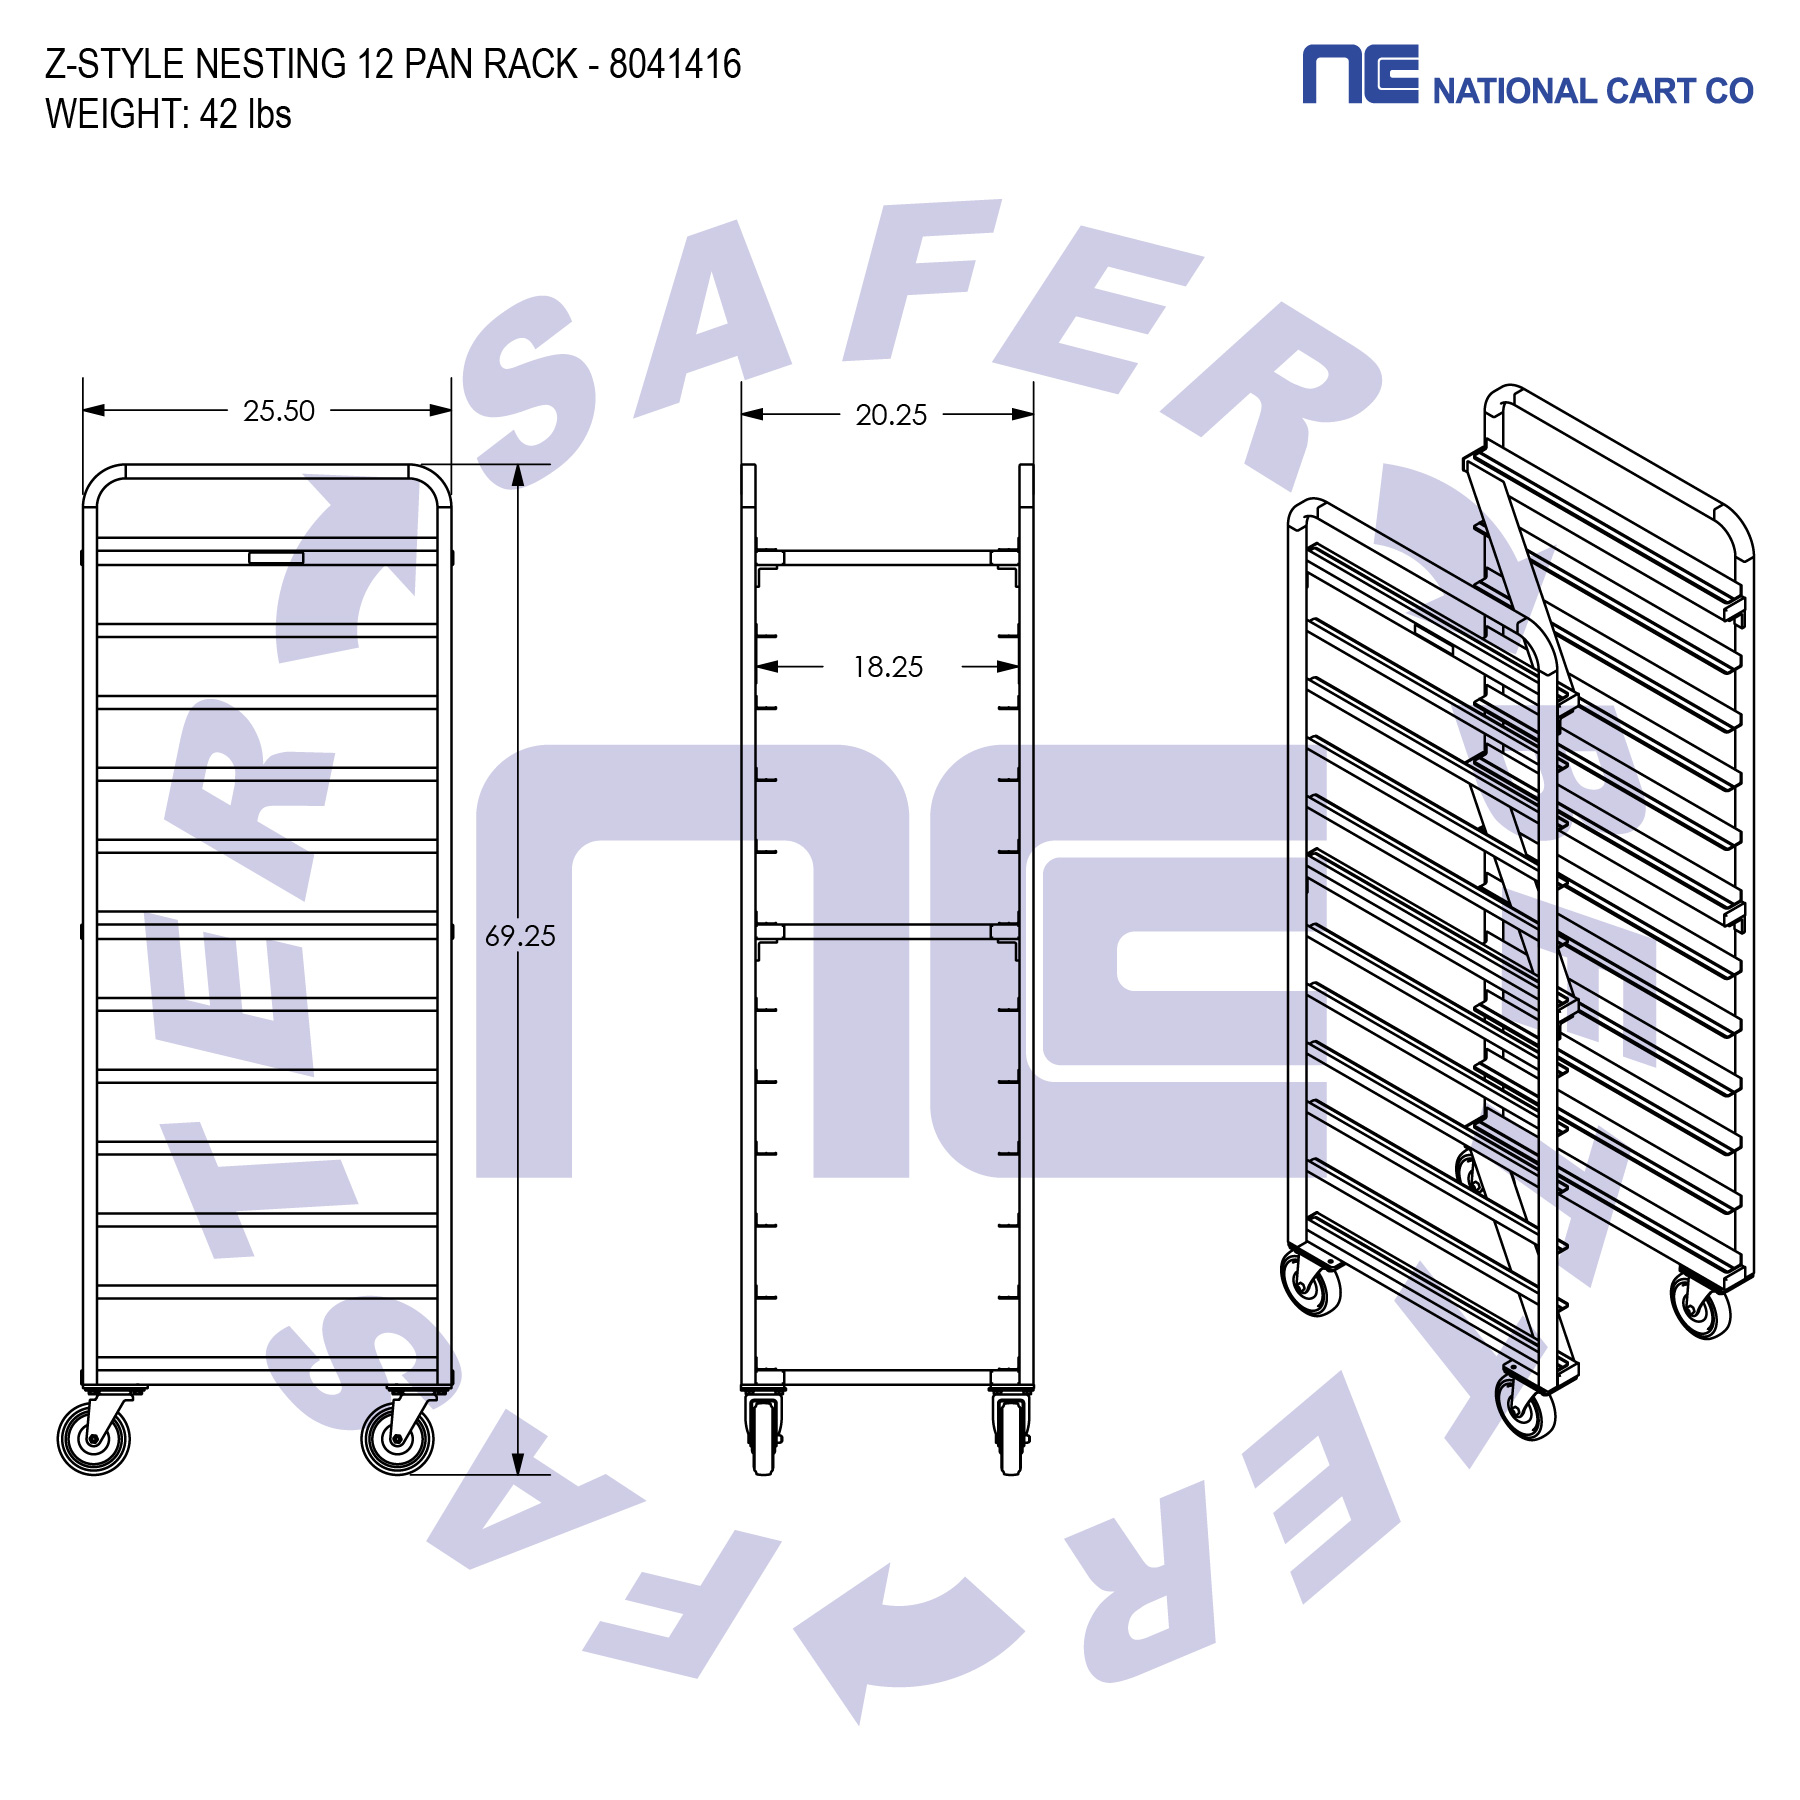 nest dollies industrial cart nesting picking cart NSF cart NSF rack NSF approved NSF certified National Sanitation Foundation tray shelf Distribution Cart picking cart tray shelf picking cart, picking cart, ecom cart, ecommerce cart, ecommerce picking cart, picking cart, INDUSTRIAL CARTS, grocery cart grocery picking cart, department store cart, beverage cart NSF approved. This food service cart meets strict standards and procedures imposed by NSF. lug cart meat department, produce department bakery cart bakery rack bakery carts bakery racks meat rack meat cart sushi cart salad bar cart deli cart stream table cart buffet cart cart stock